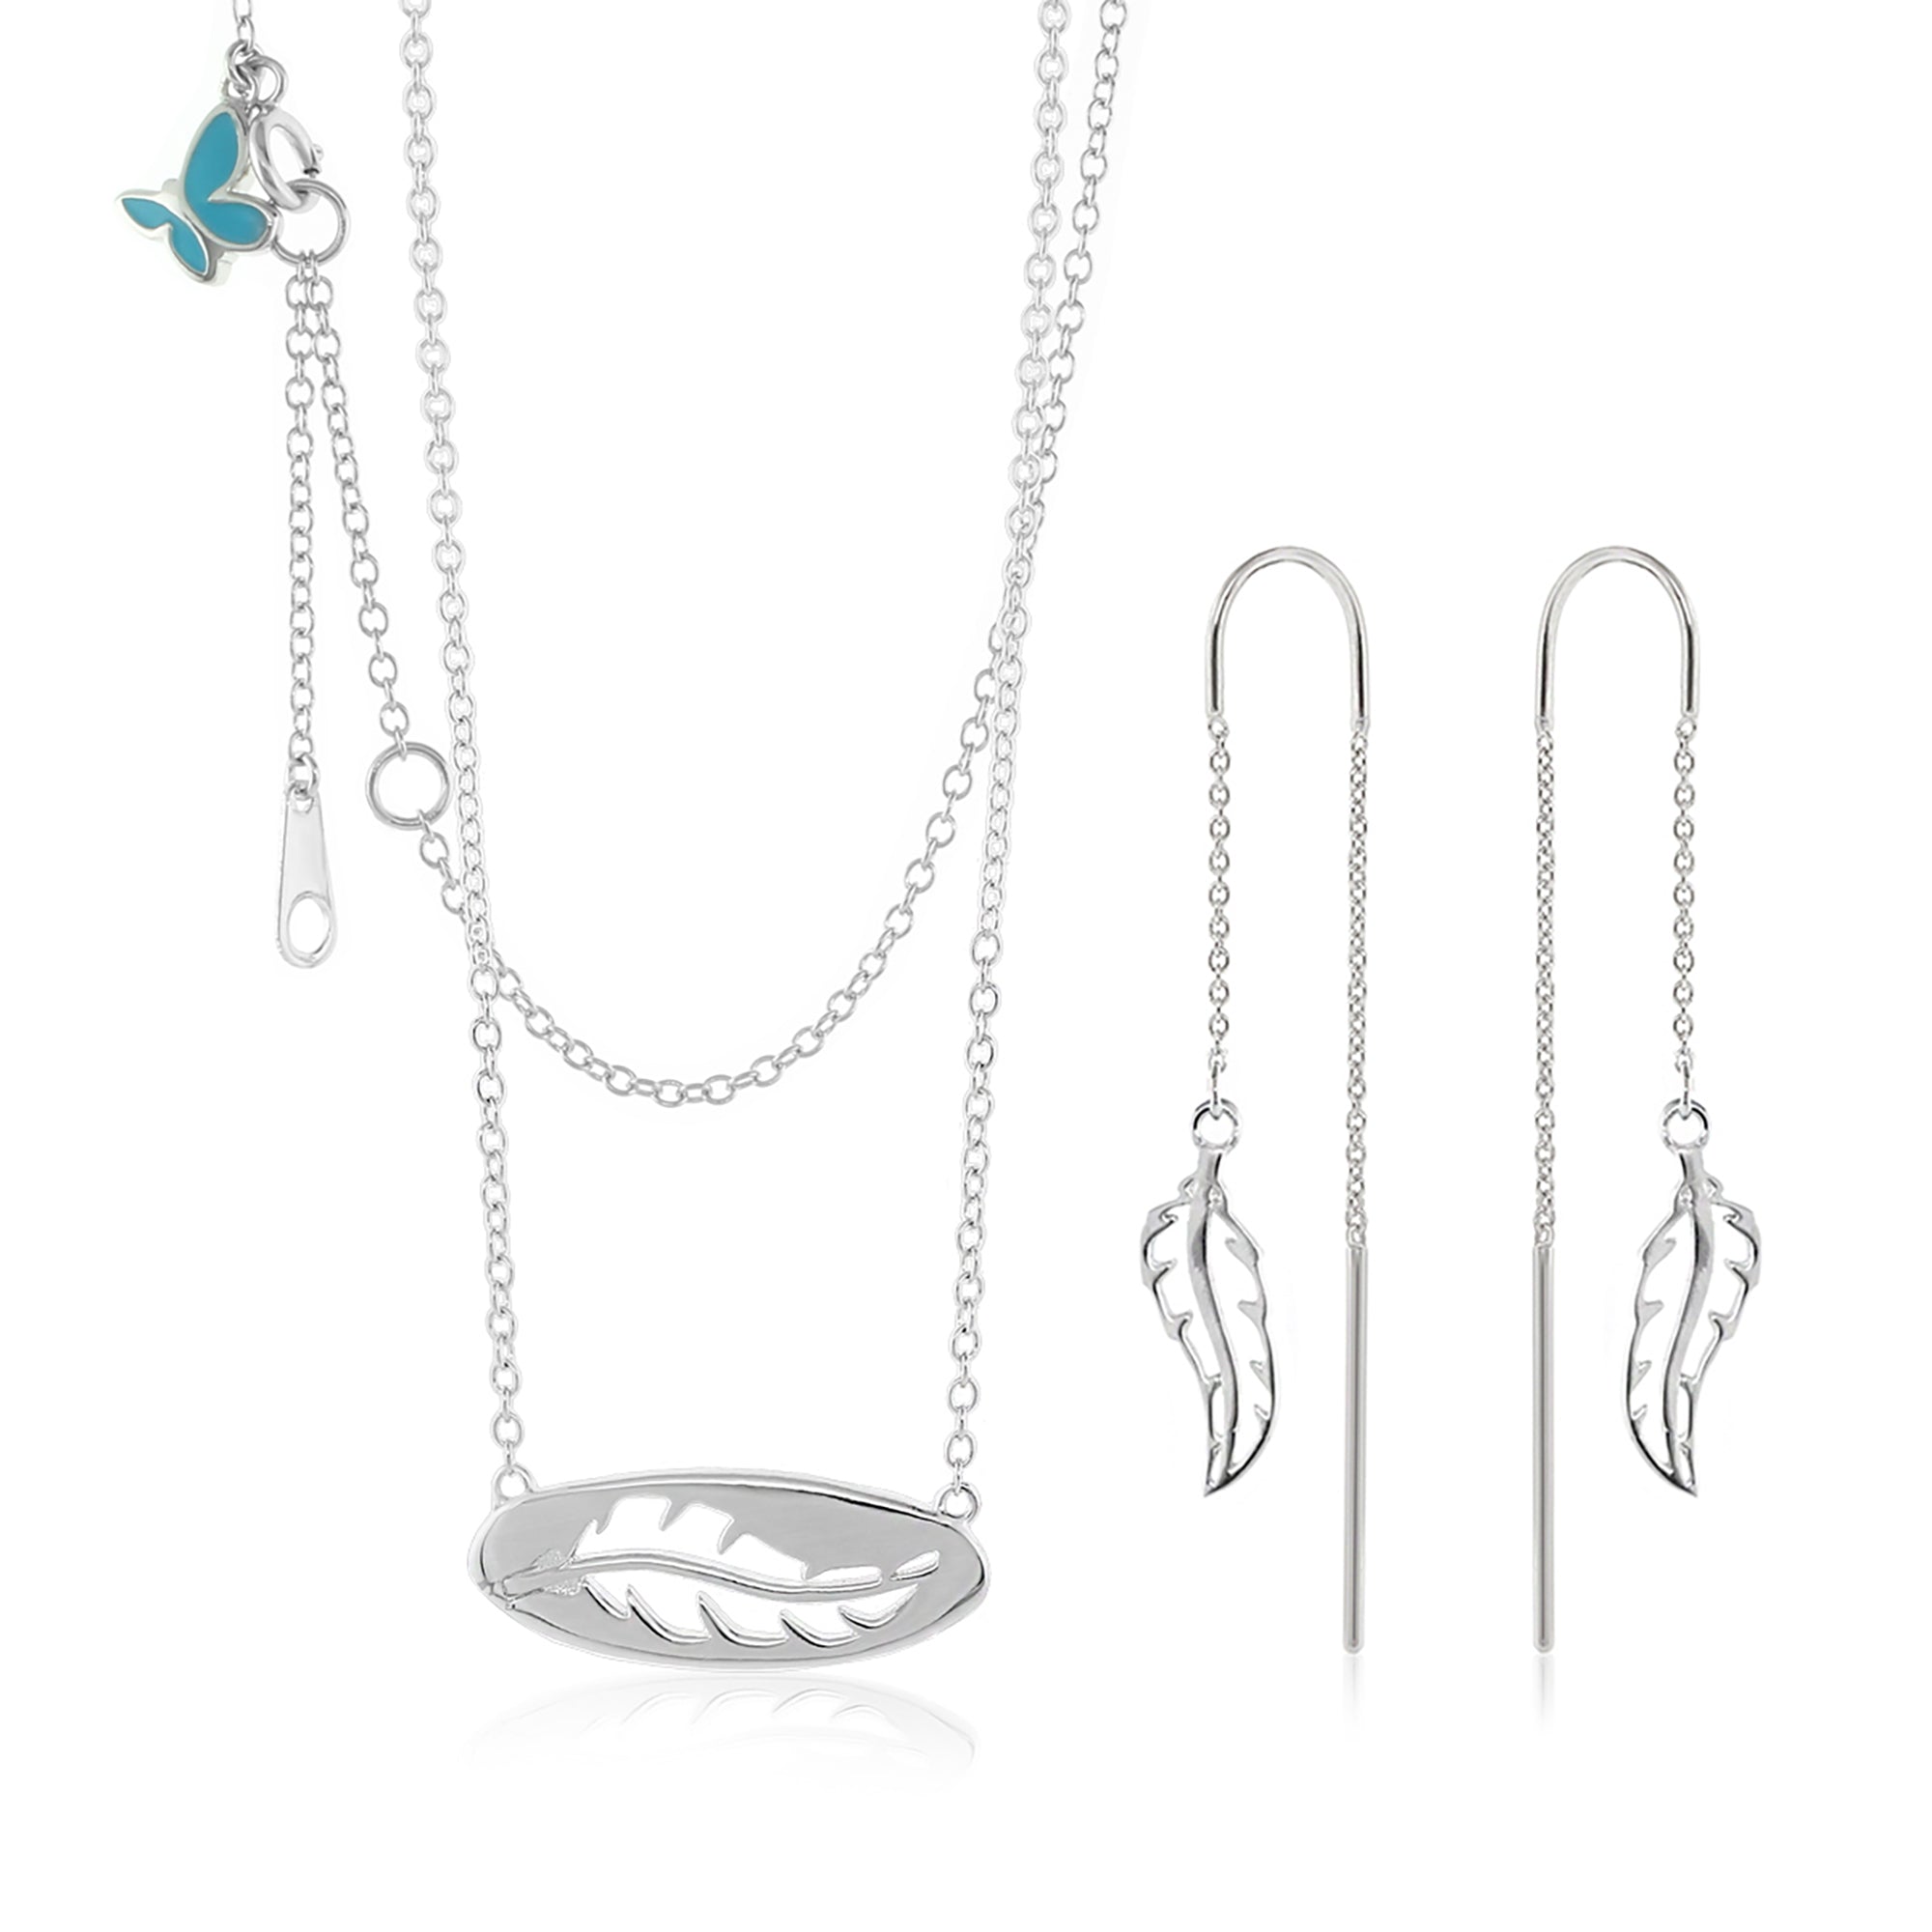 Sydney Leigh Feather Necklace & Earrings Set